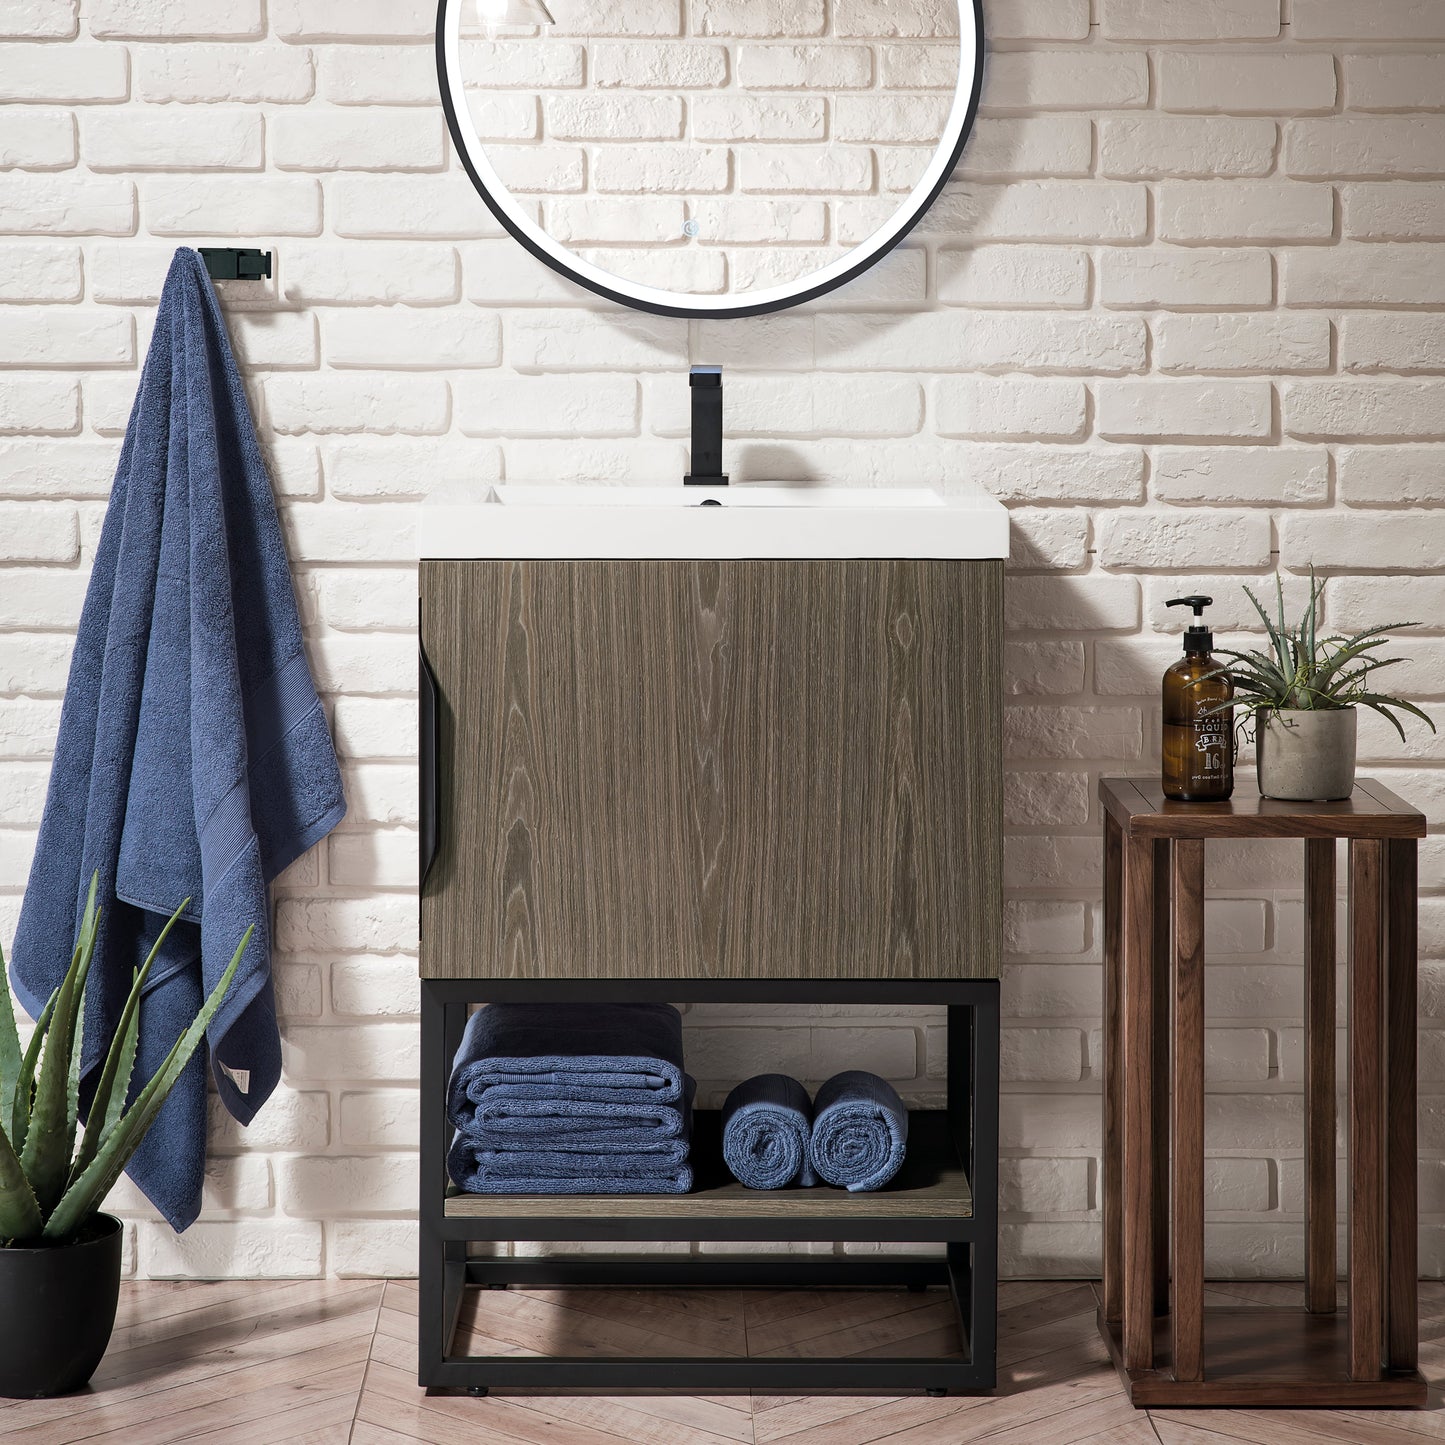 Columbia 24 Single Vanity Cabinet in Ash Gray with Radiant Gold Base